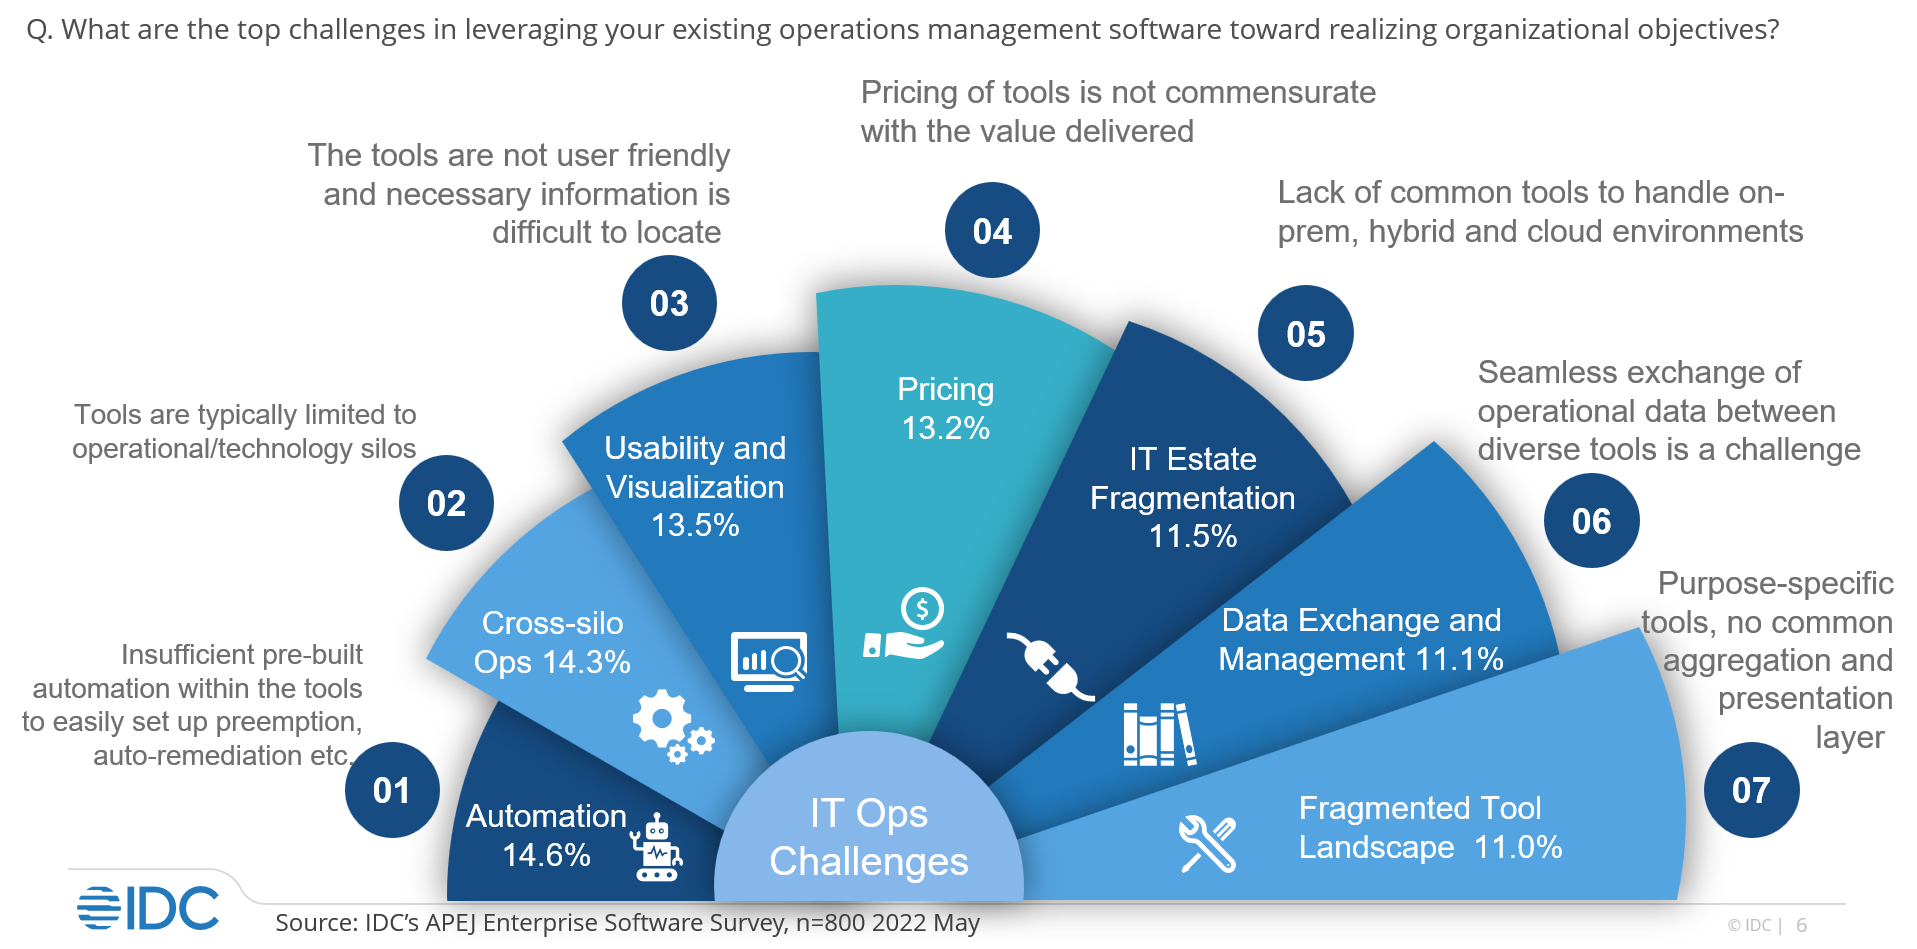 IDC Reveals Asia Pacific Enterprises’ Top 7 IT Operations Challenges With Their Existing Operations Management Software - 2022 Jul -F-1